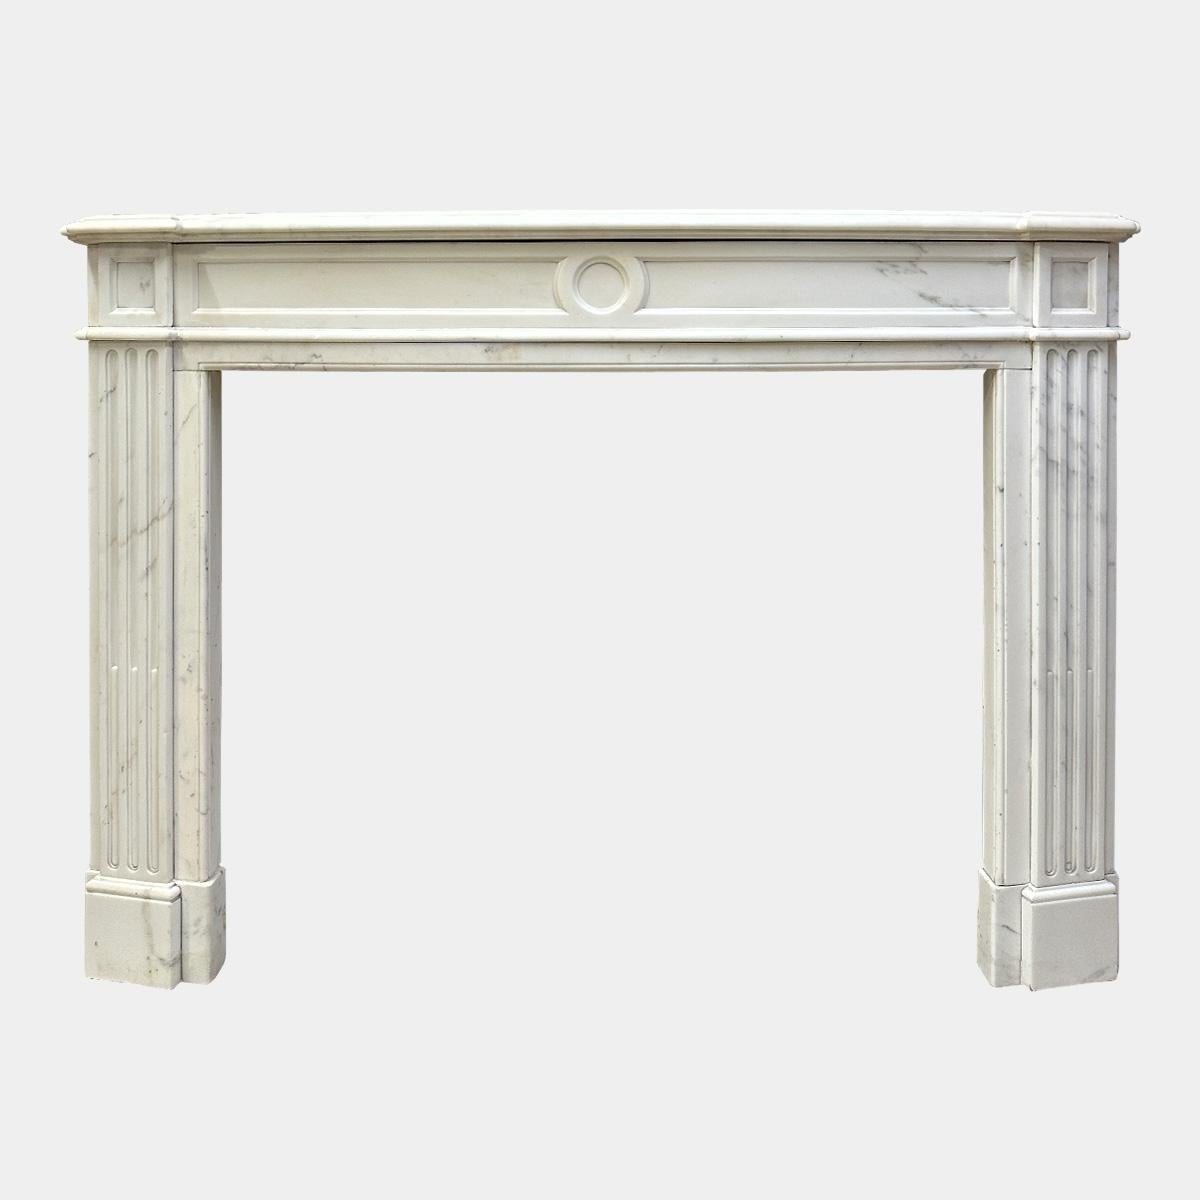 An antique 19th century Statuary white marble Louis XVI style fireplace mantel, with bow fronted frieze and shelf. The jambs with deep side returns and fluted front panels terminating in square fielded corner blocks. the bow fronted frieze again